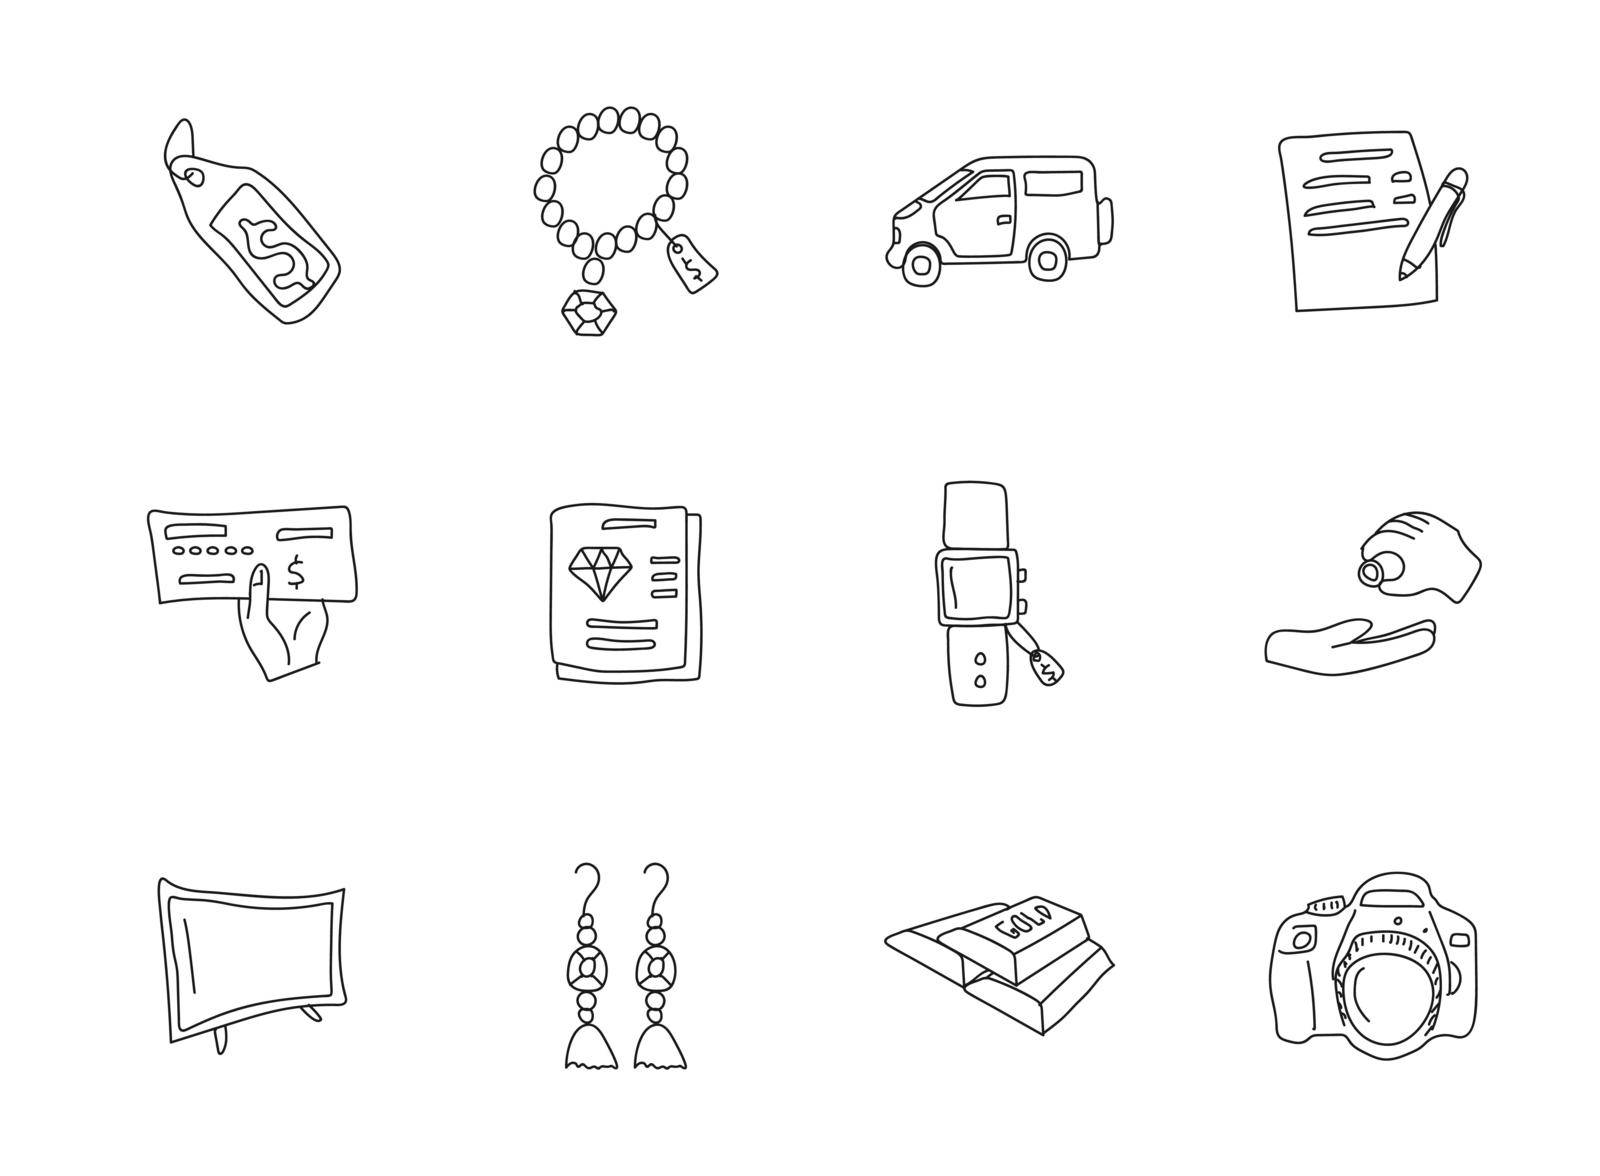 pawnshop doodles isolated on white. pawnshop icon set for web design, user interface, mobile apps and print by govindamadhava108